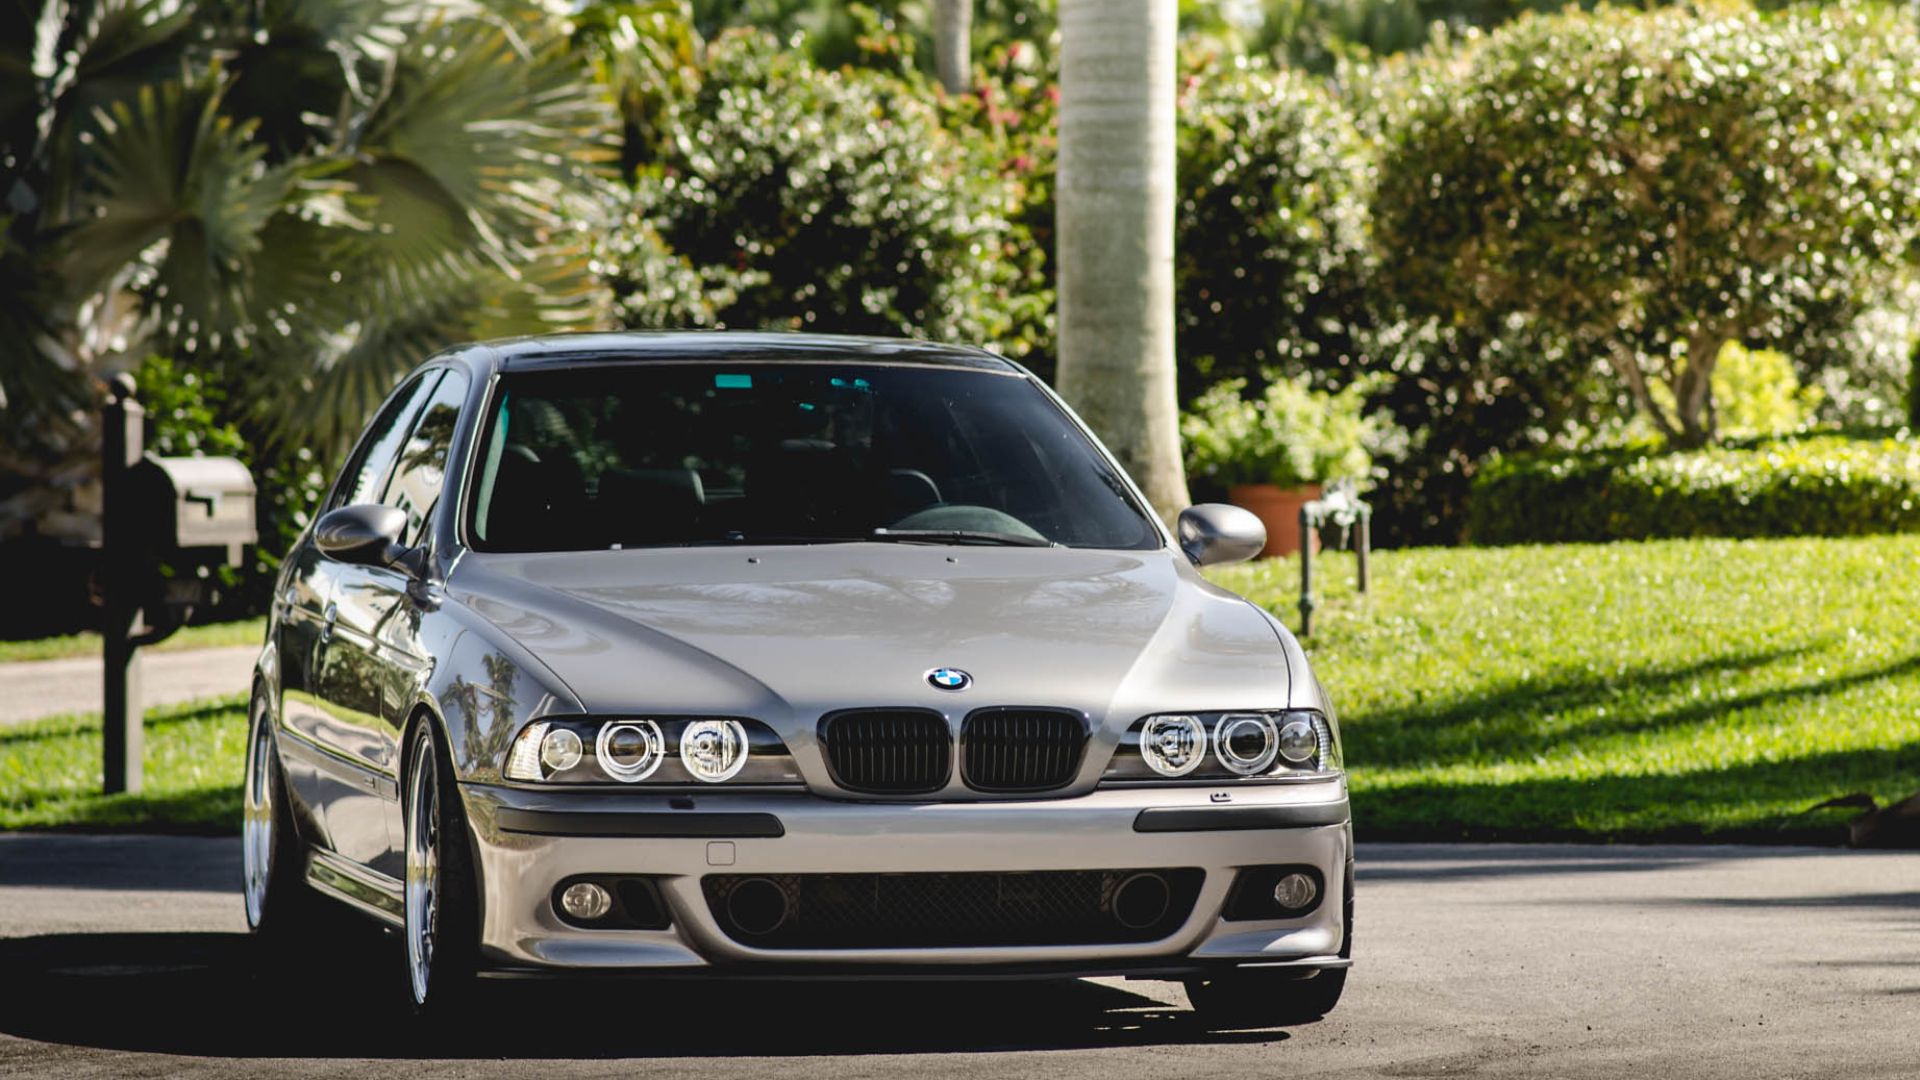 E39 M5 By AJH.RAW Flickr